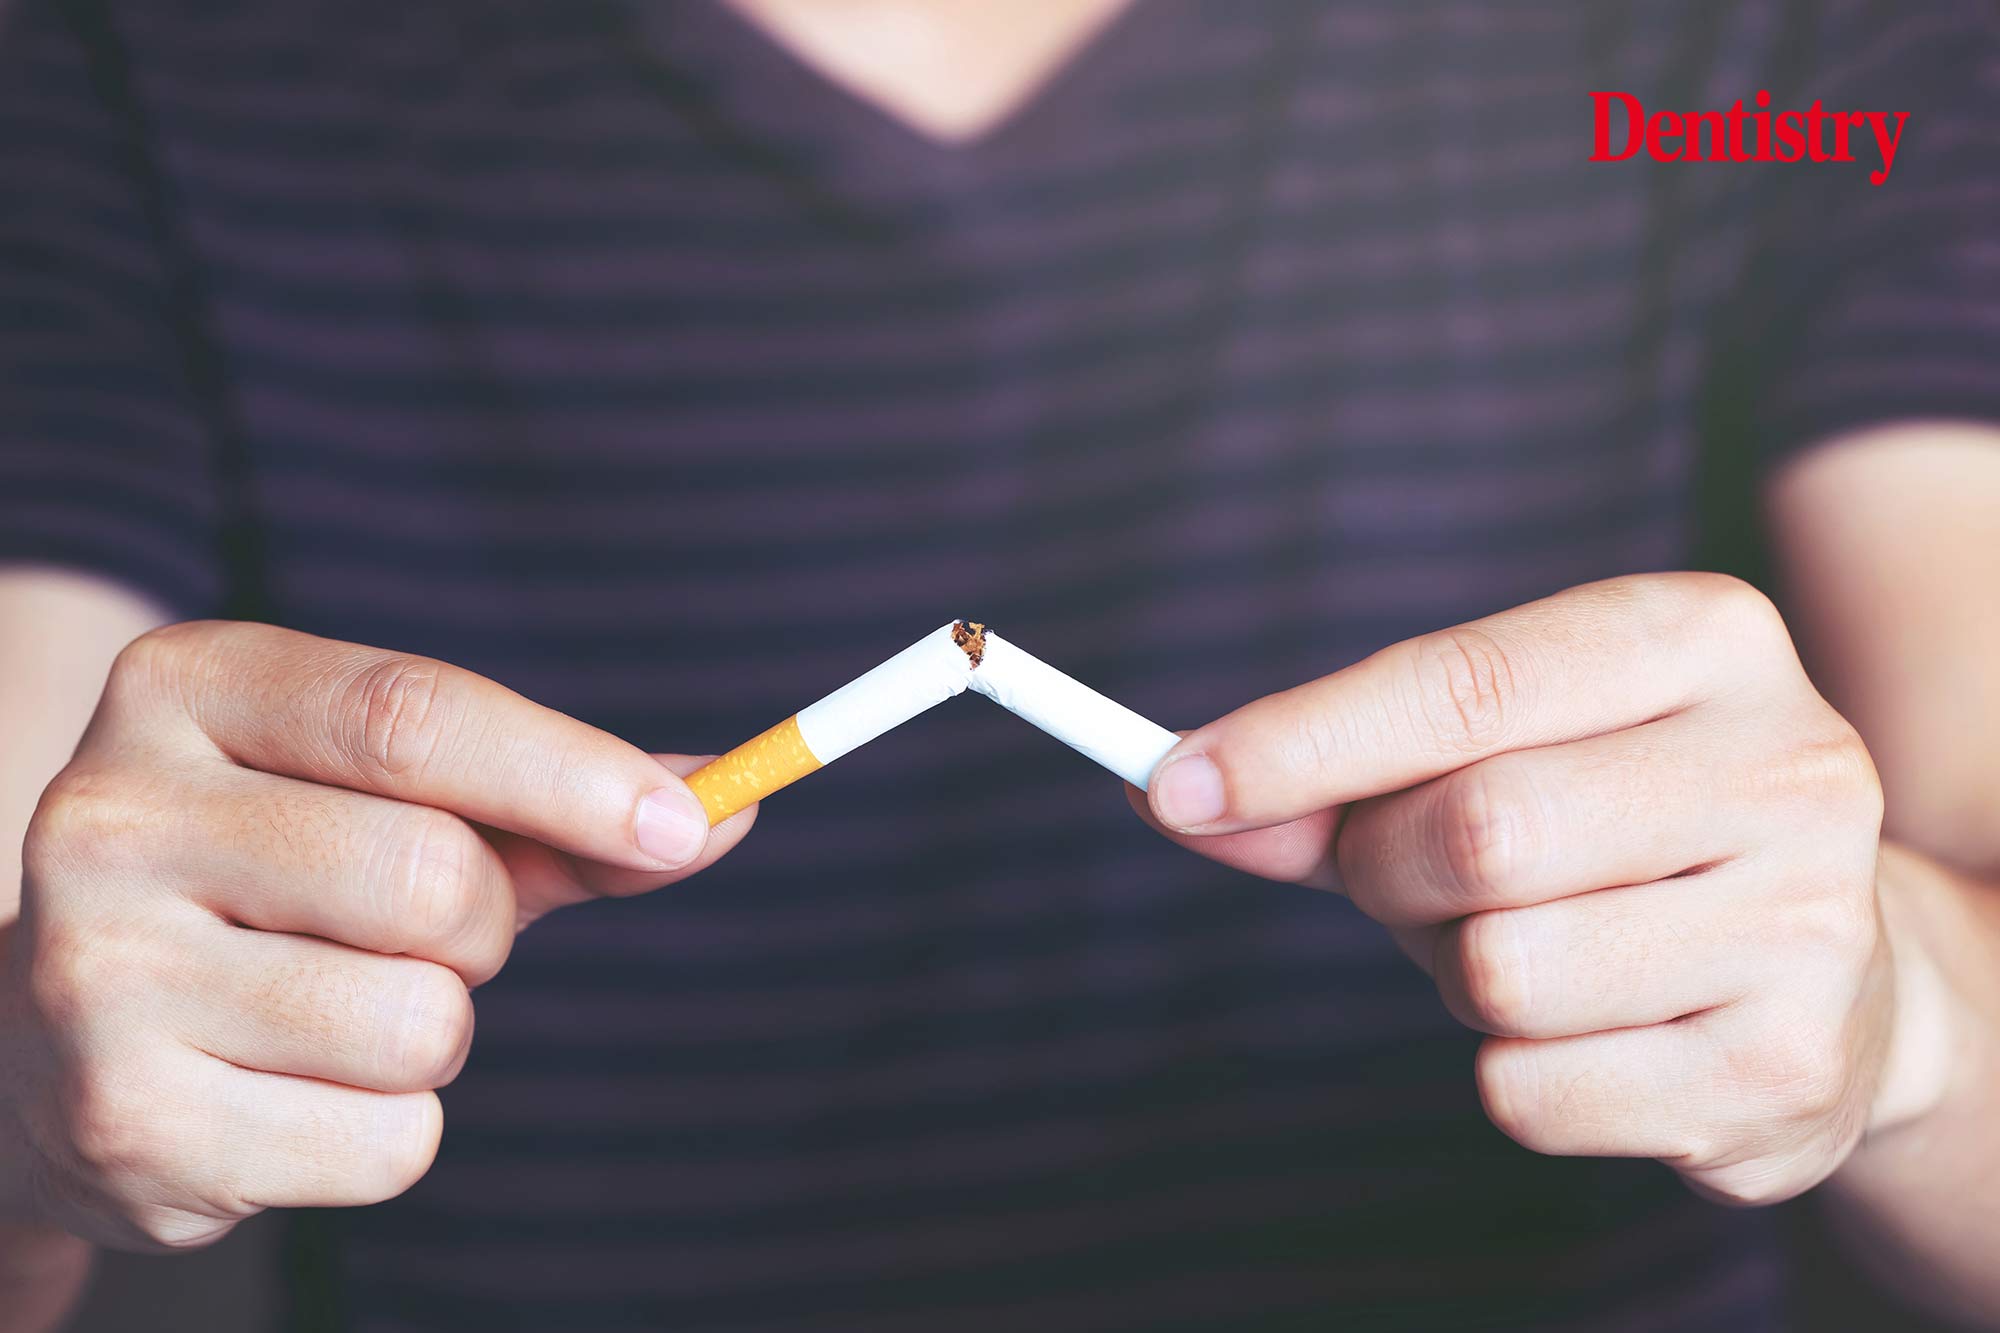 Published today, a World Health Organization (WHO) report has found that tobacco use is declining across the globe. 